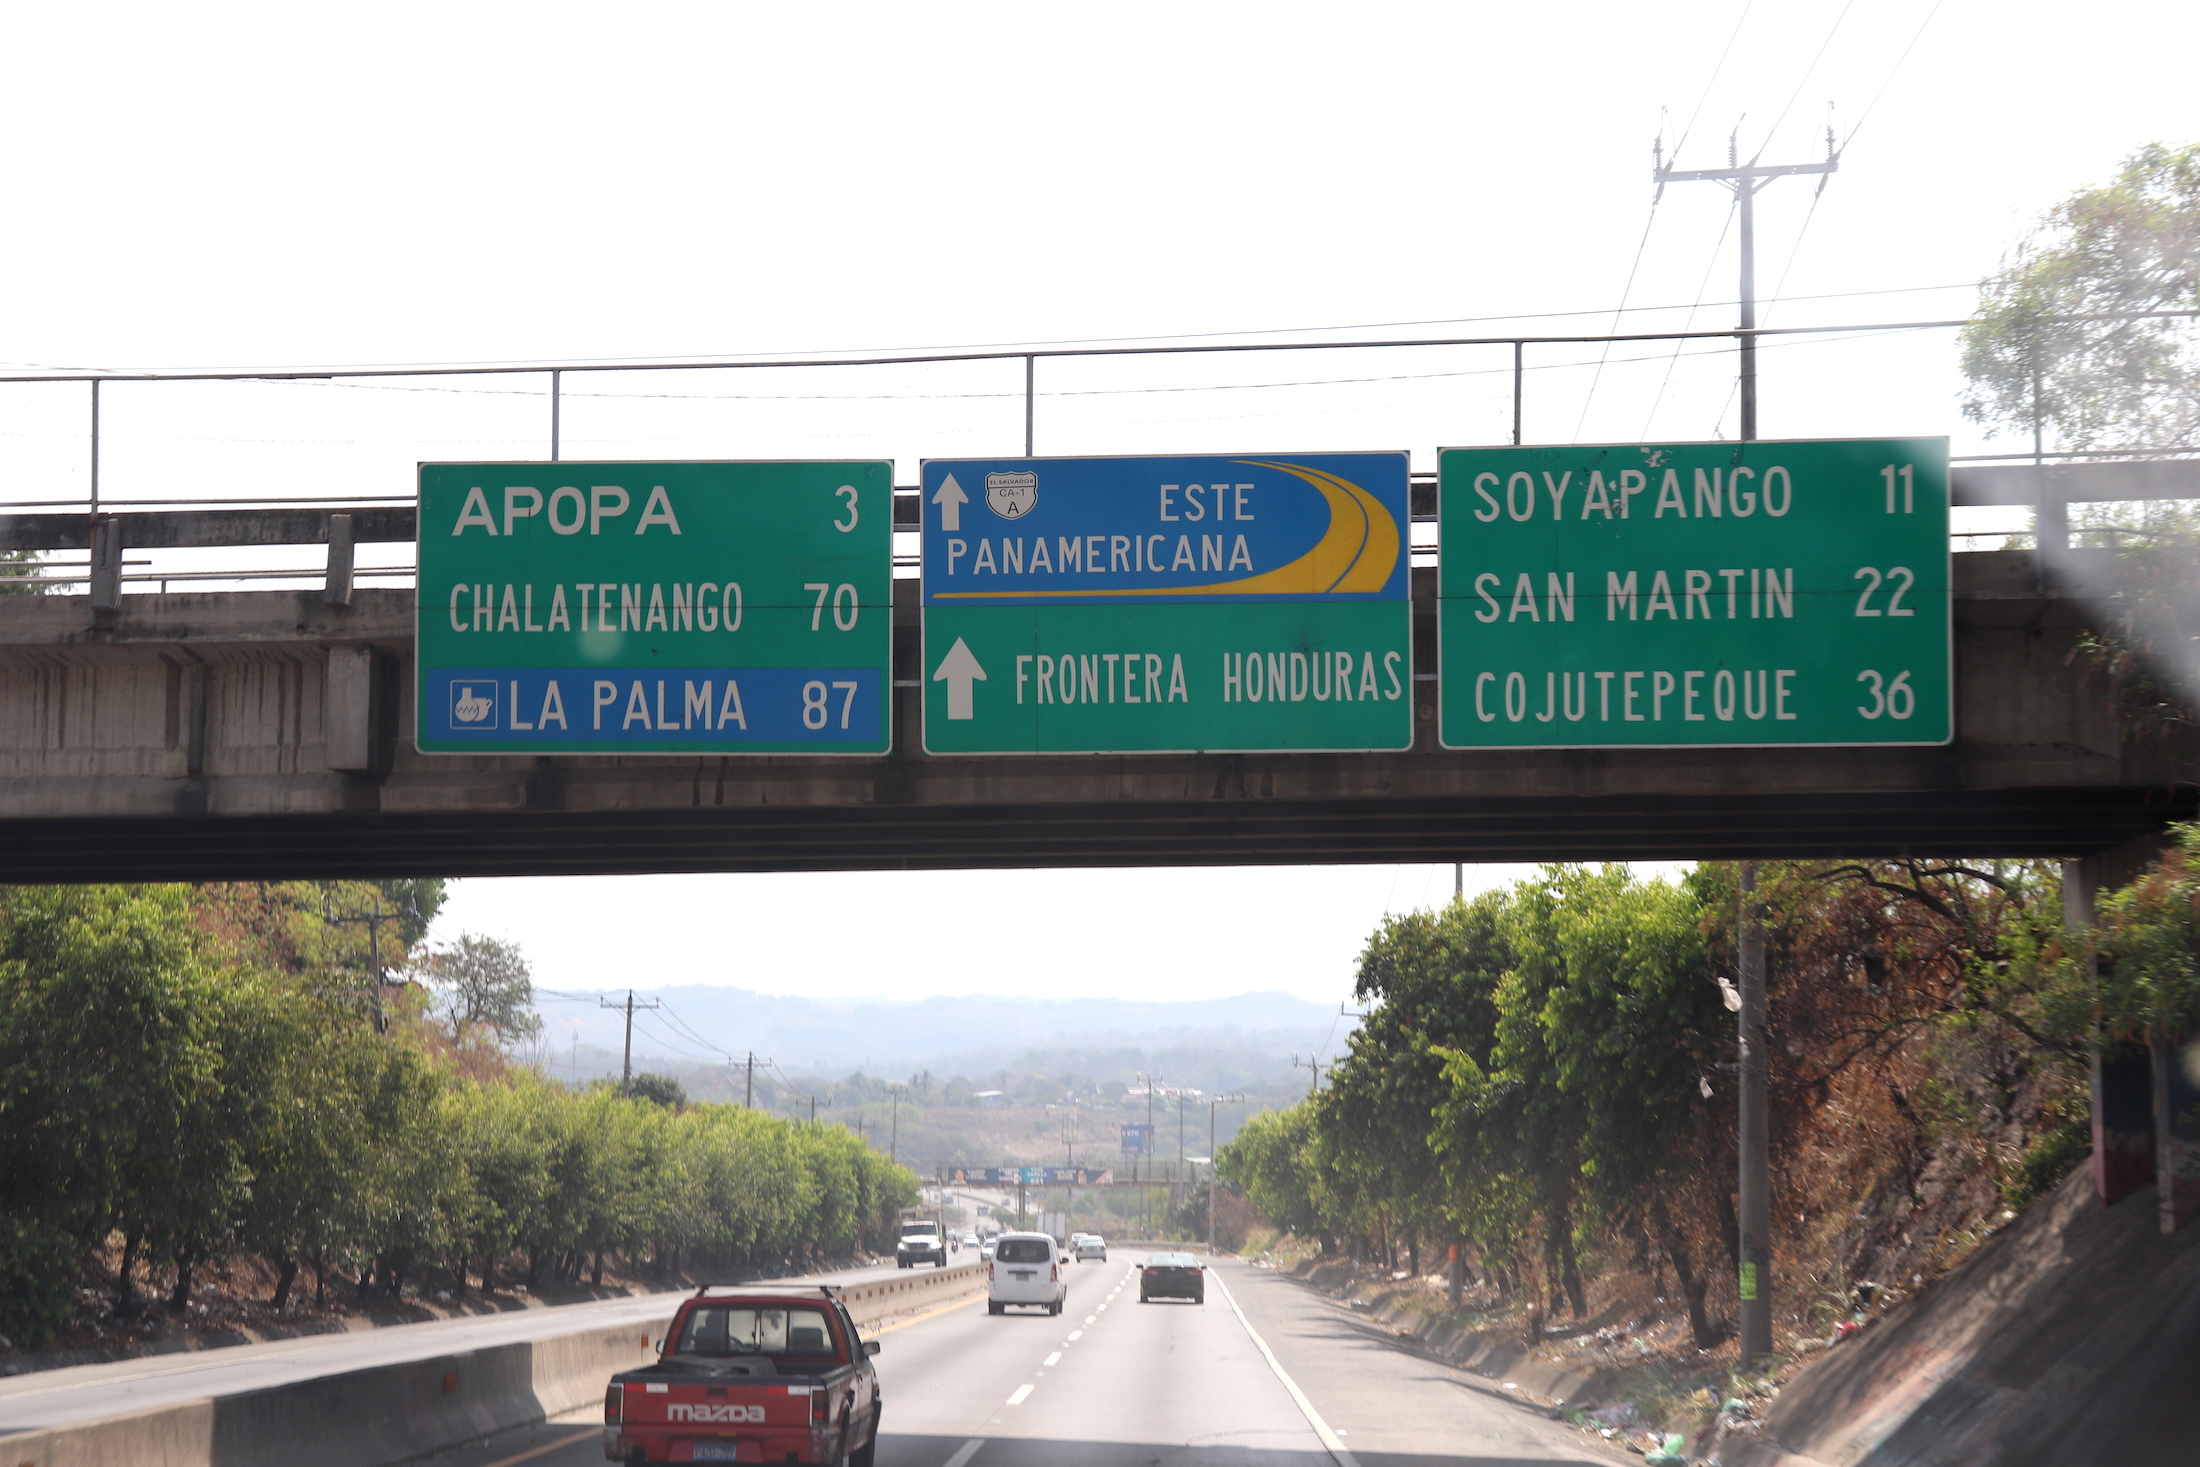 The Road to the border with Honduras